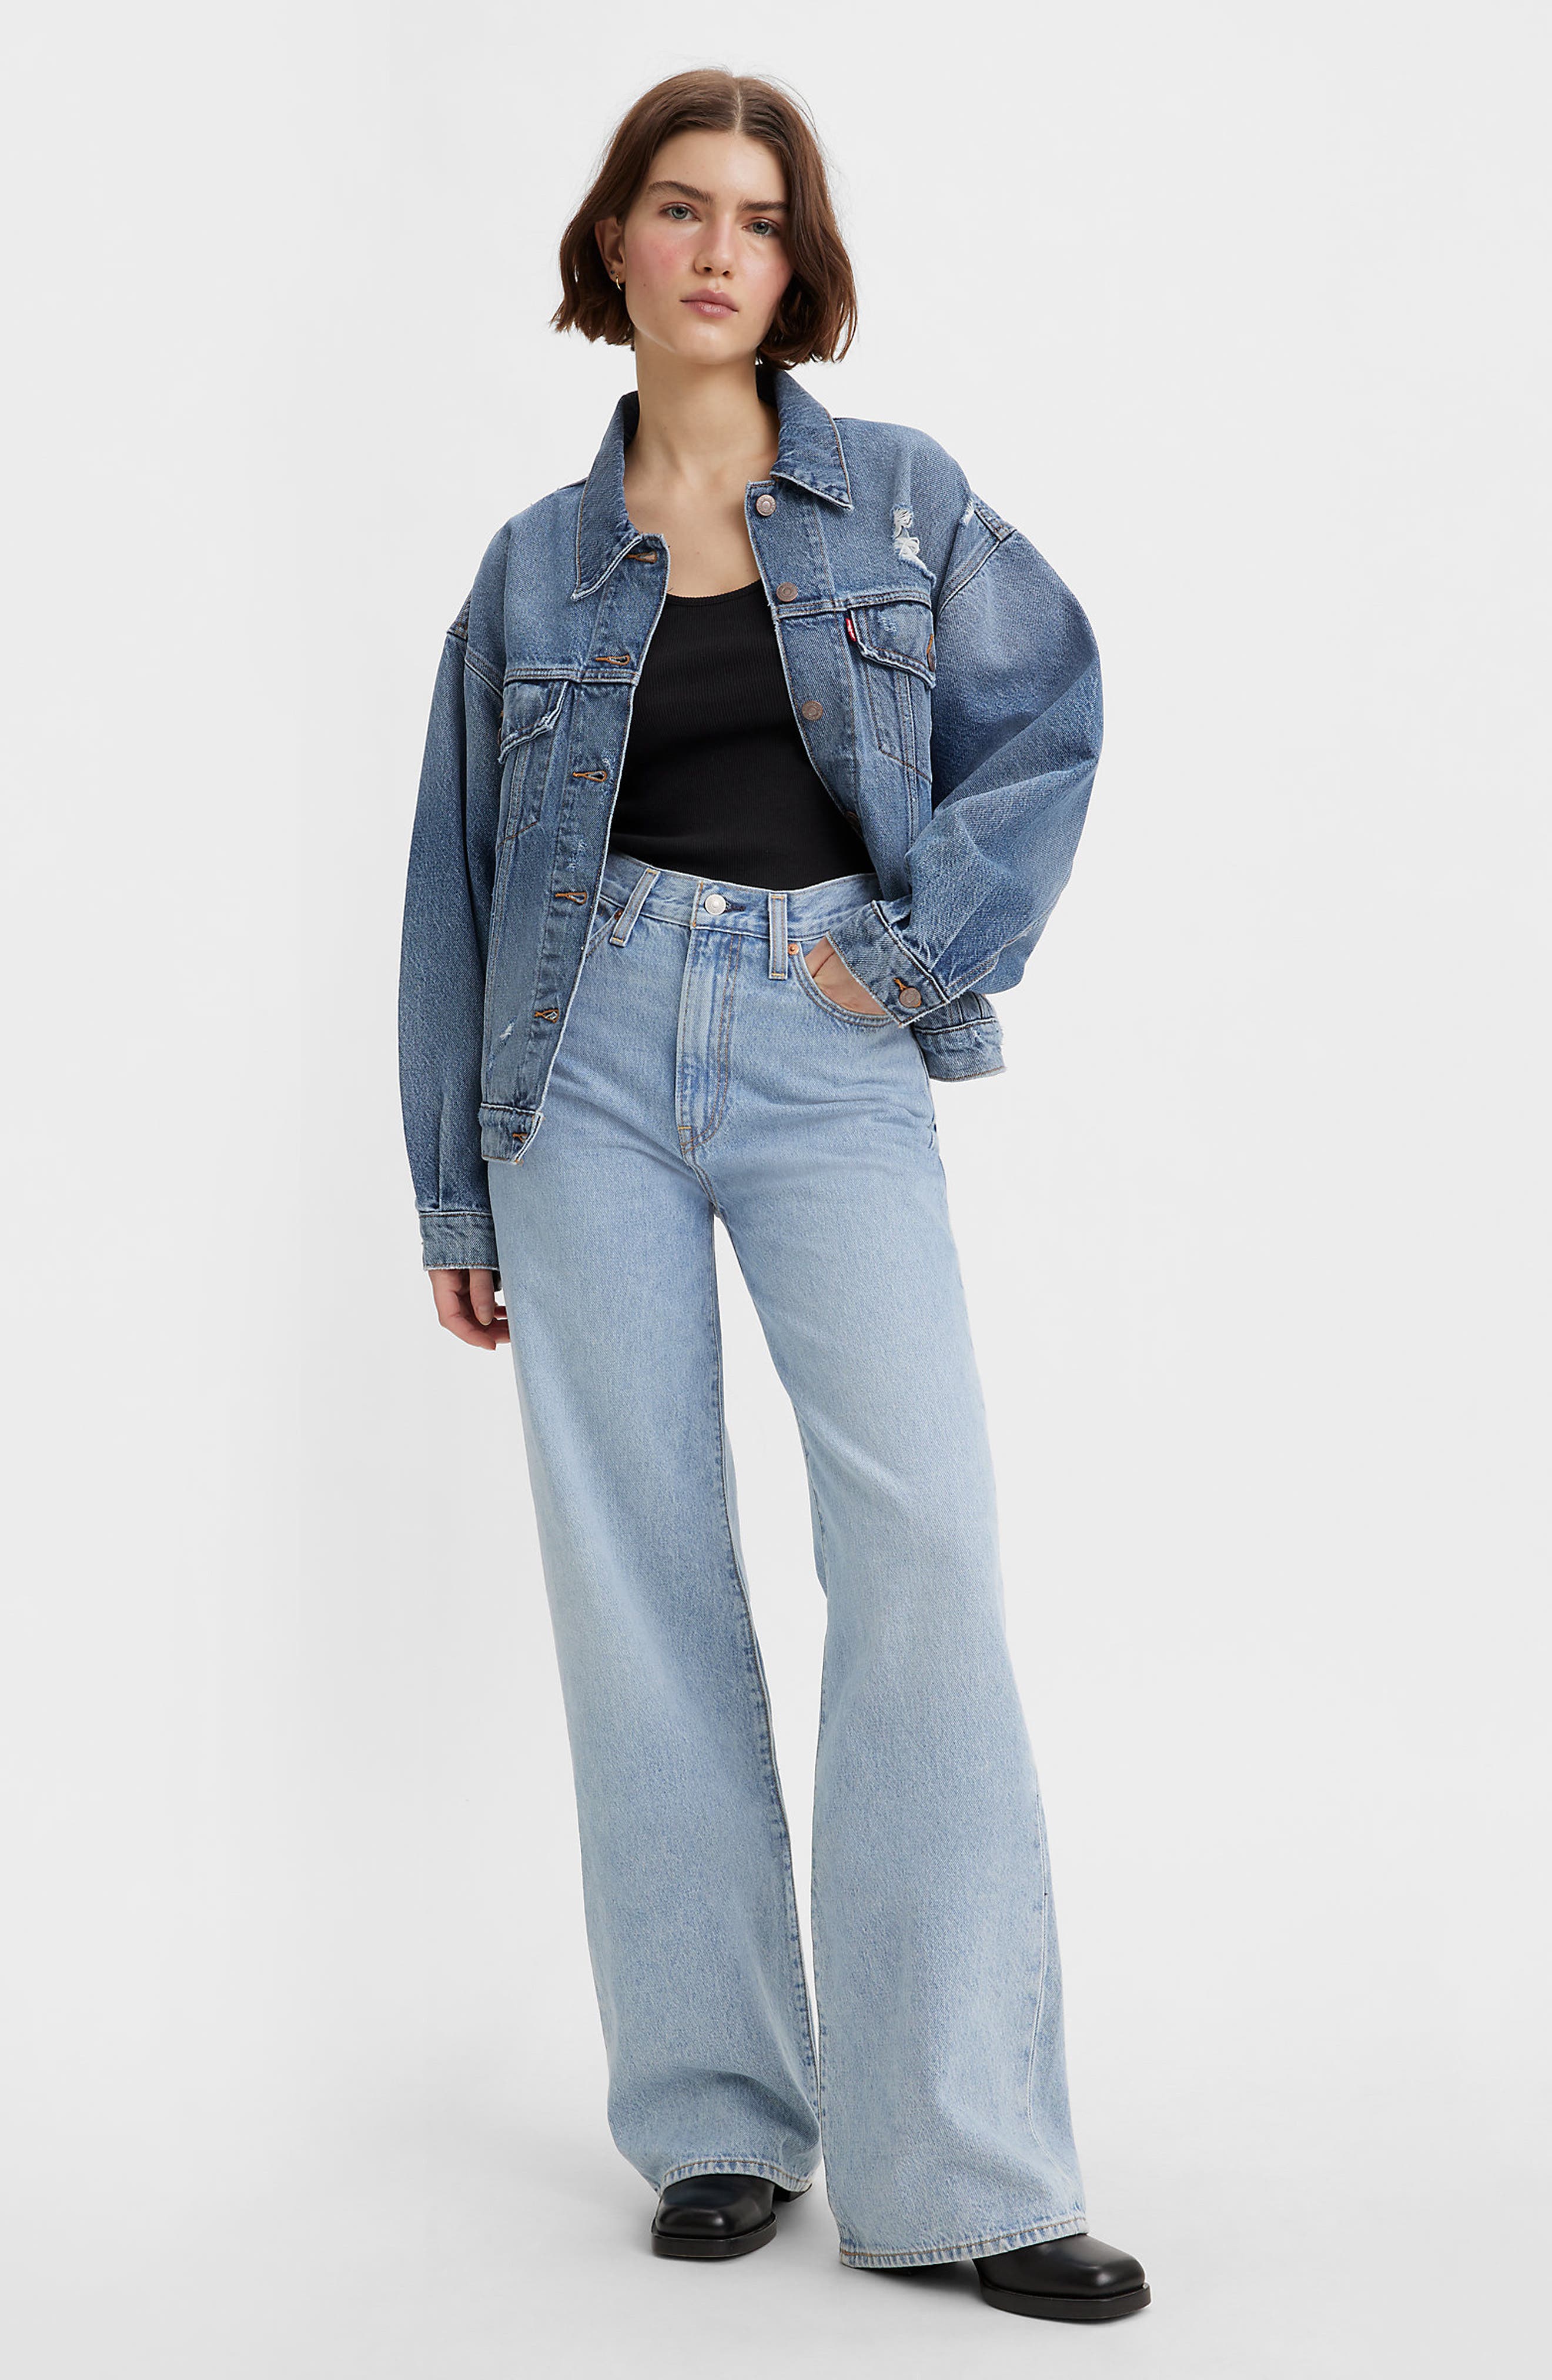 Jeans Trends 2023: 9 Totally Fresh Styles to Bookmark | Who What Wear